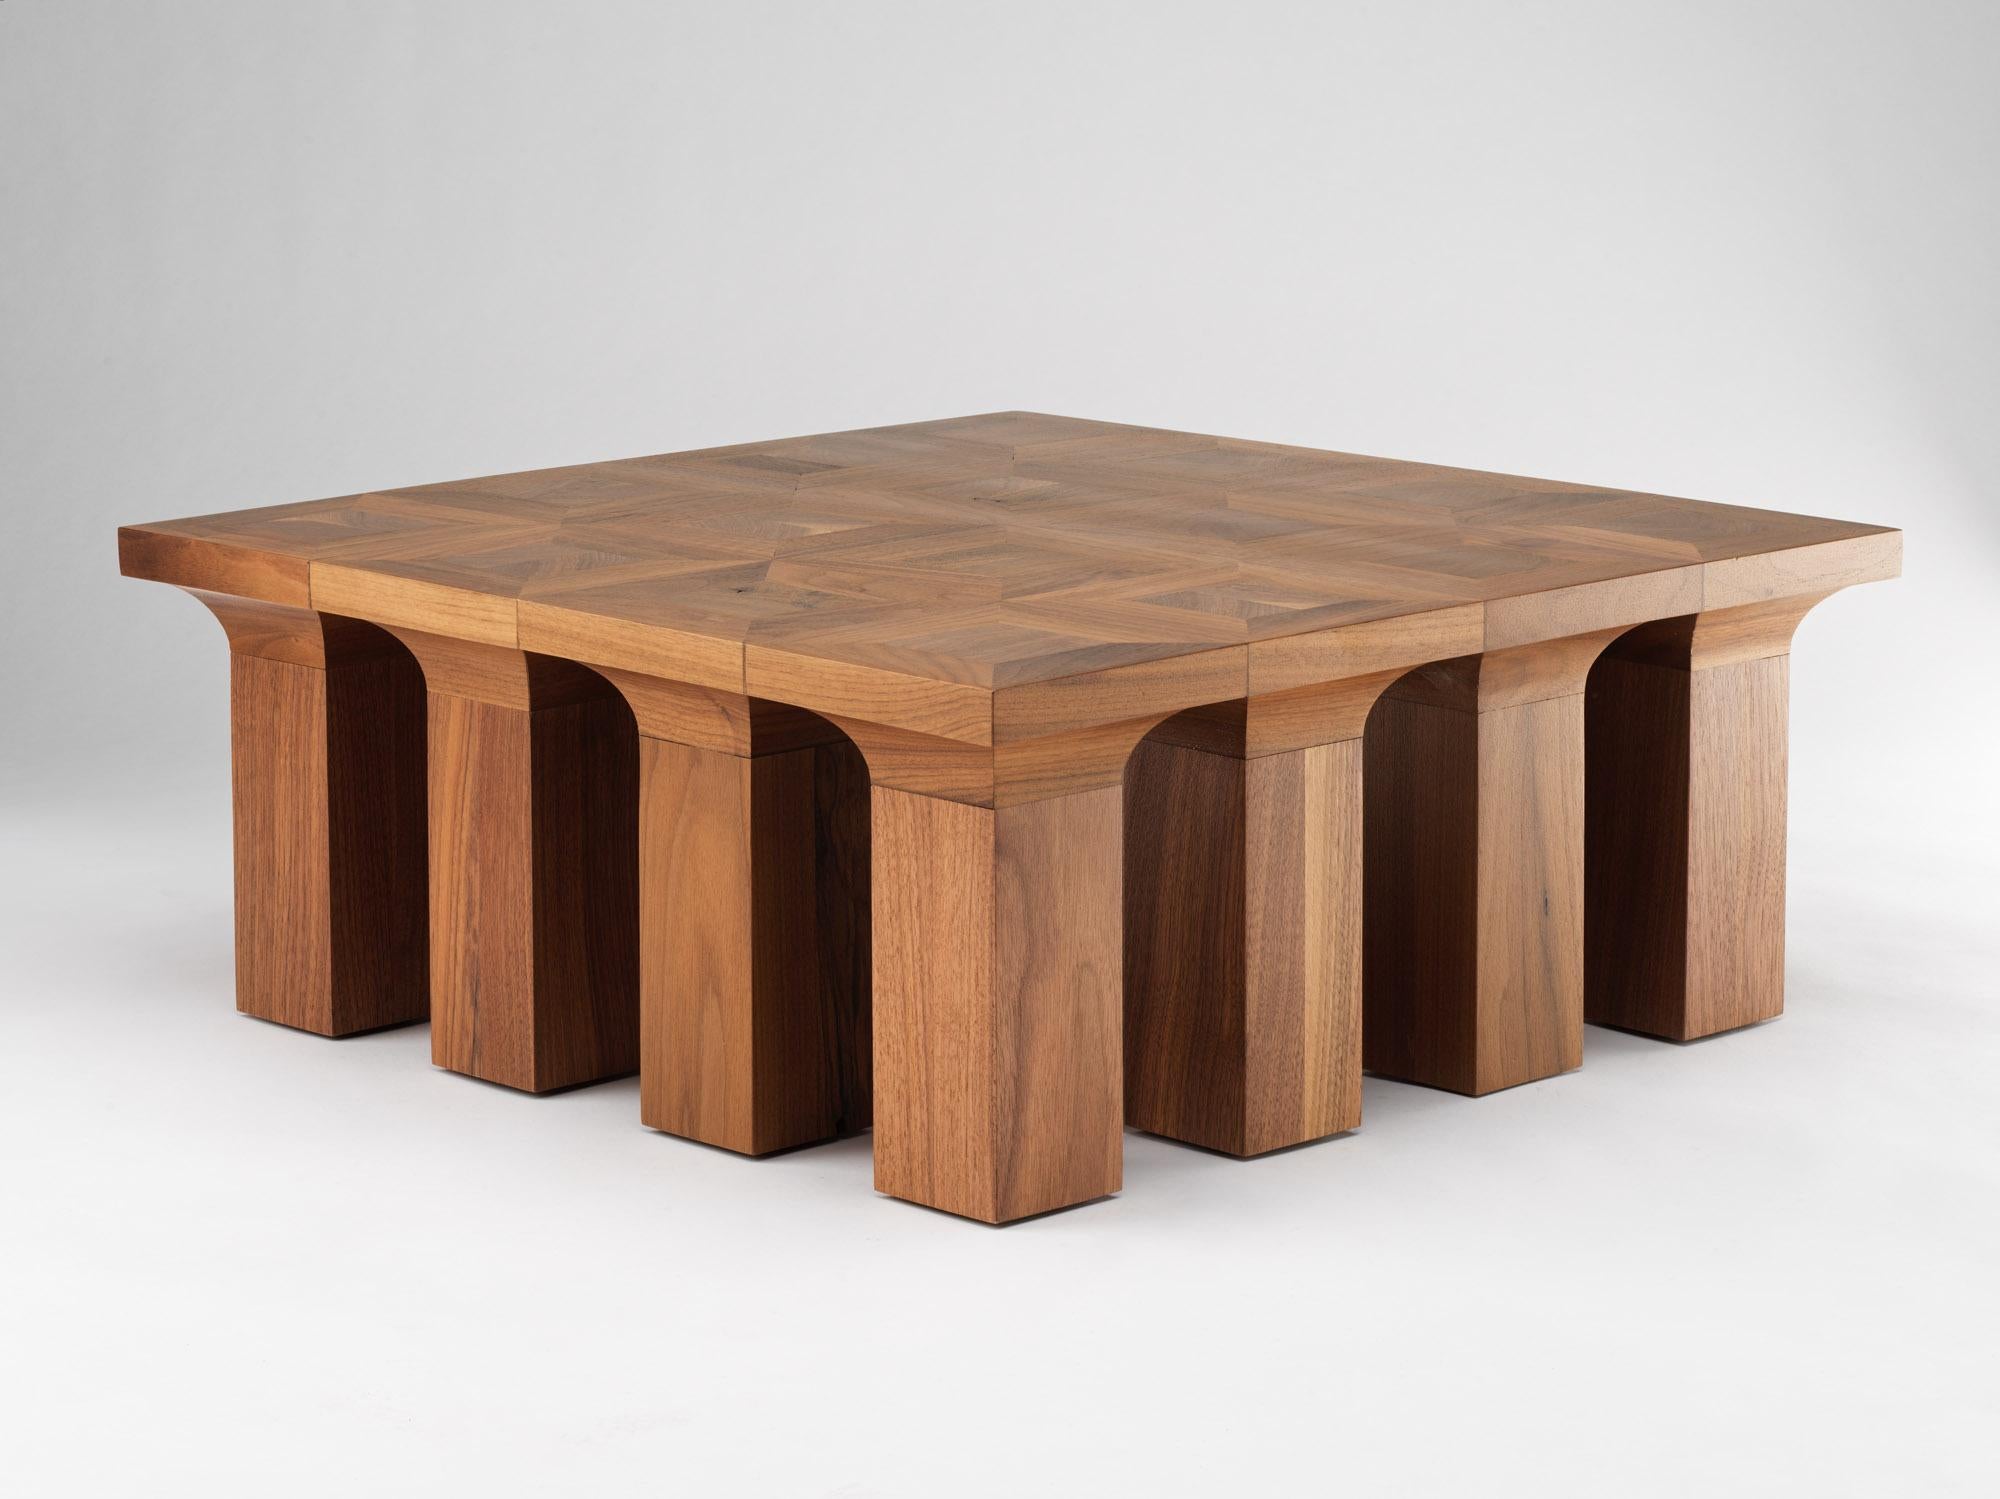 Arcus coffee table 60 by Tim Vranken
Limited edition 8 pieces
Materials: American Walnut
Dimensions: 60 x 60 x H 24.5 cm 

Tim Vranken is a Belgian furniture designer who focuses on solid, handmade furniture. Throughout his designs the use of